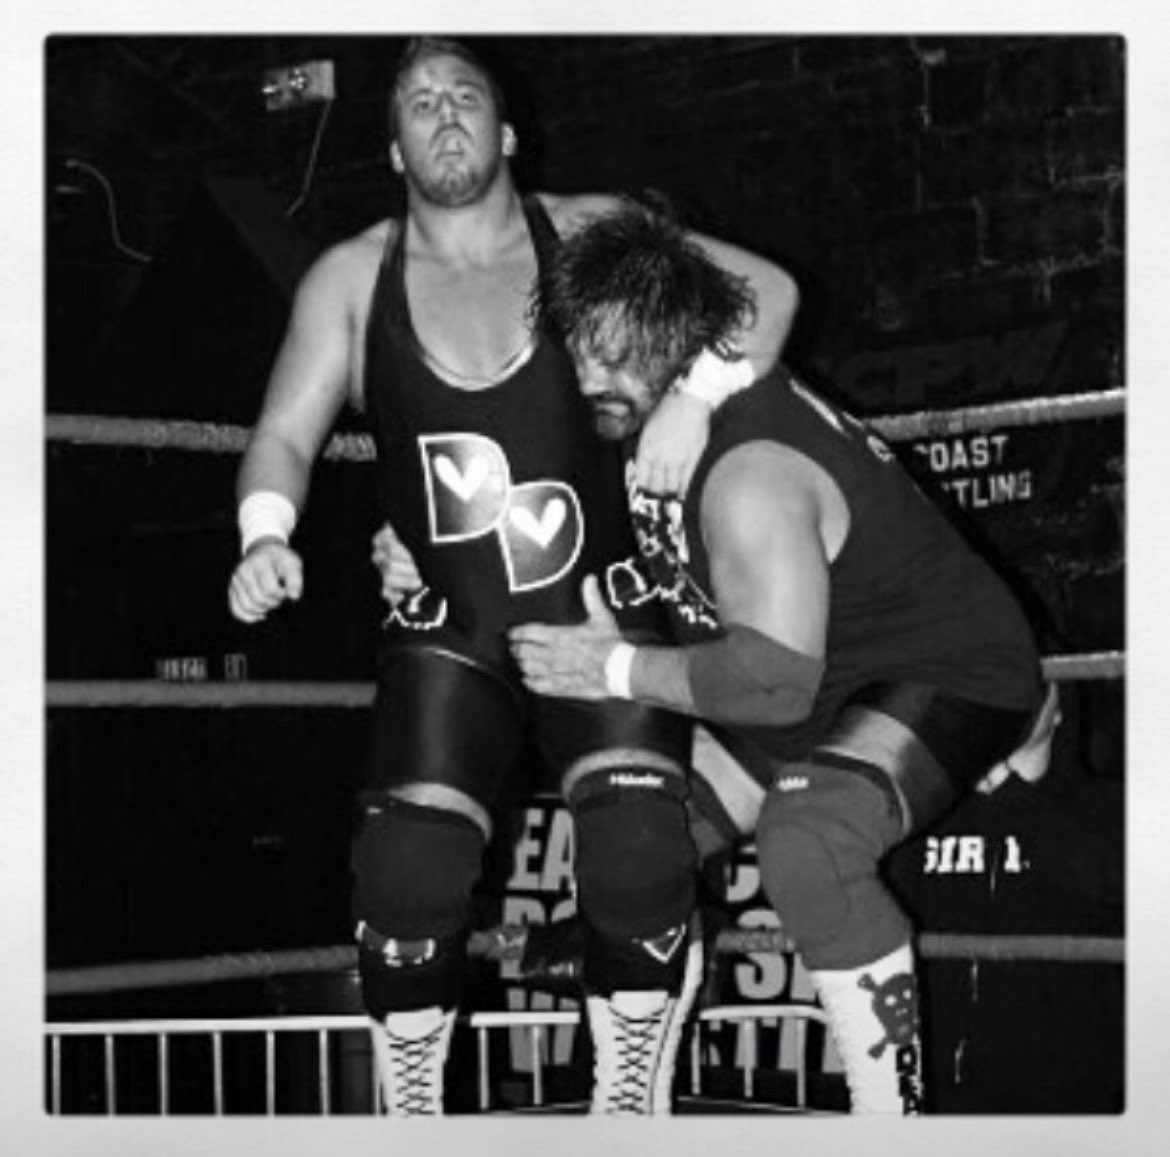 MOMENTS 🥹 PRO WRESTLING has given me so many cool moments with my heroes. Being one of Dr. Death Steve Williams’ last matches was an unreal experience. Thank you Pro Wrestling.